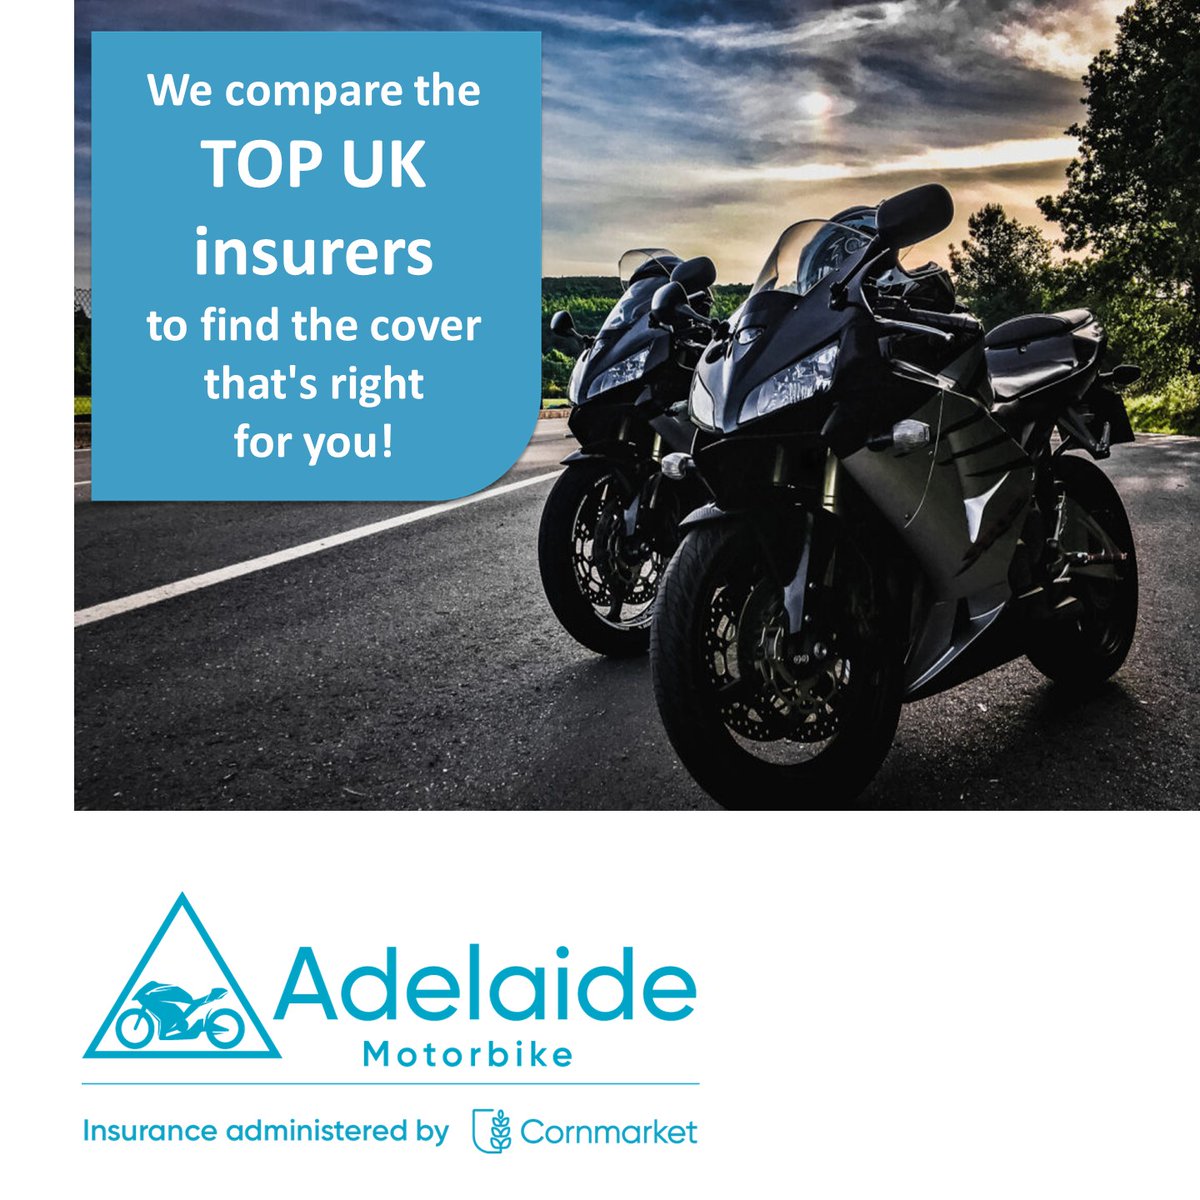 Looking for a great deal on your motorbike insurance?

Call 028 9044 5051 and let us find the cover that's right for you!

@BikeAwards @BikeSafeUK @northwest200 @BMFofficialuk @motorcyclelive